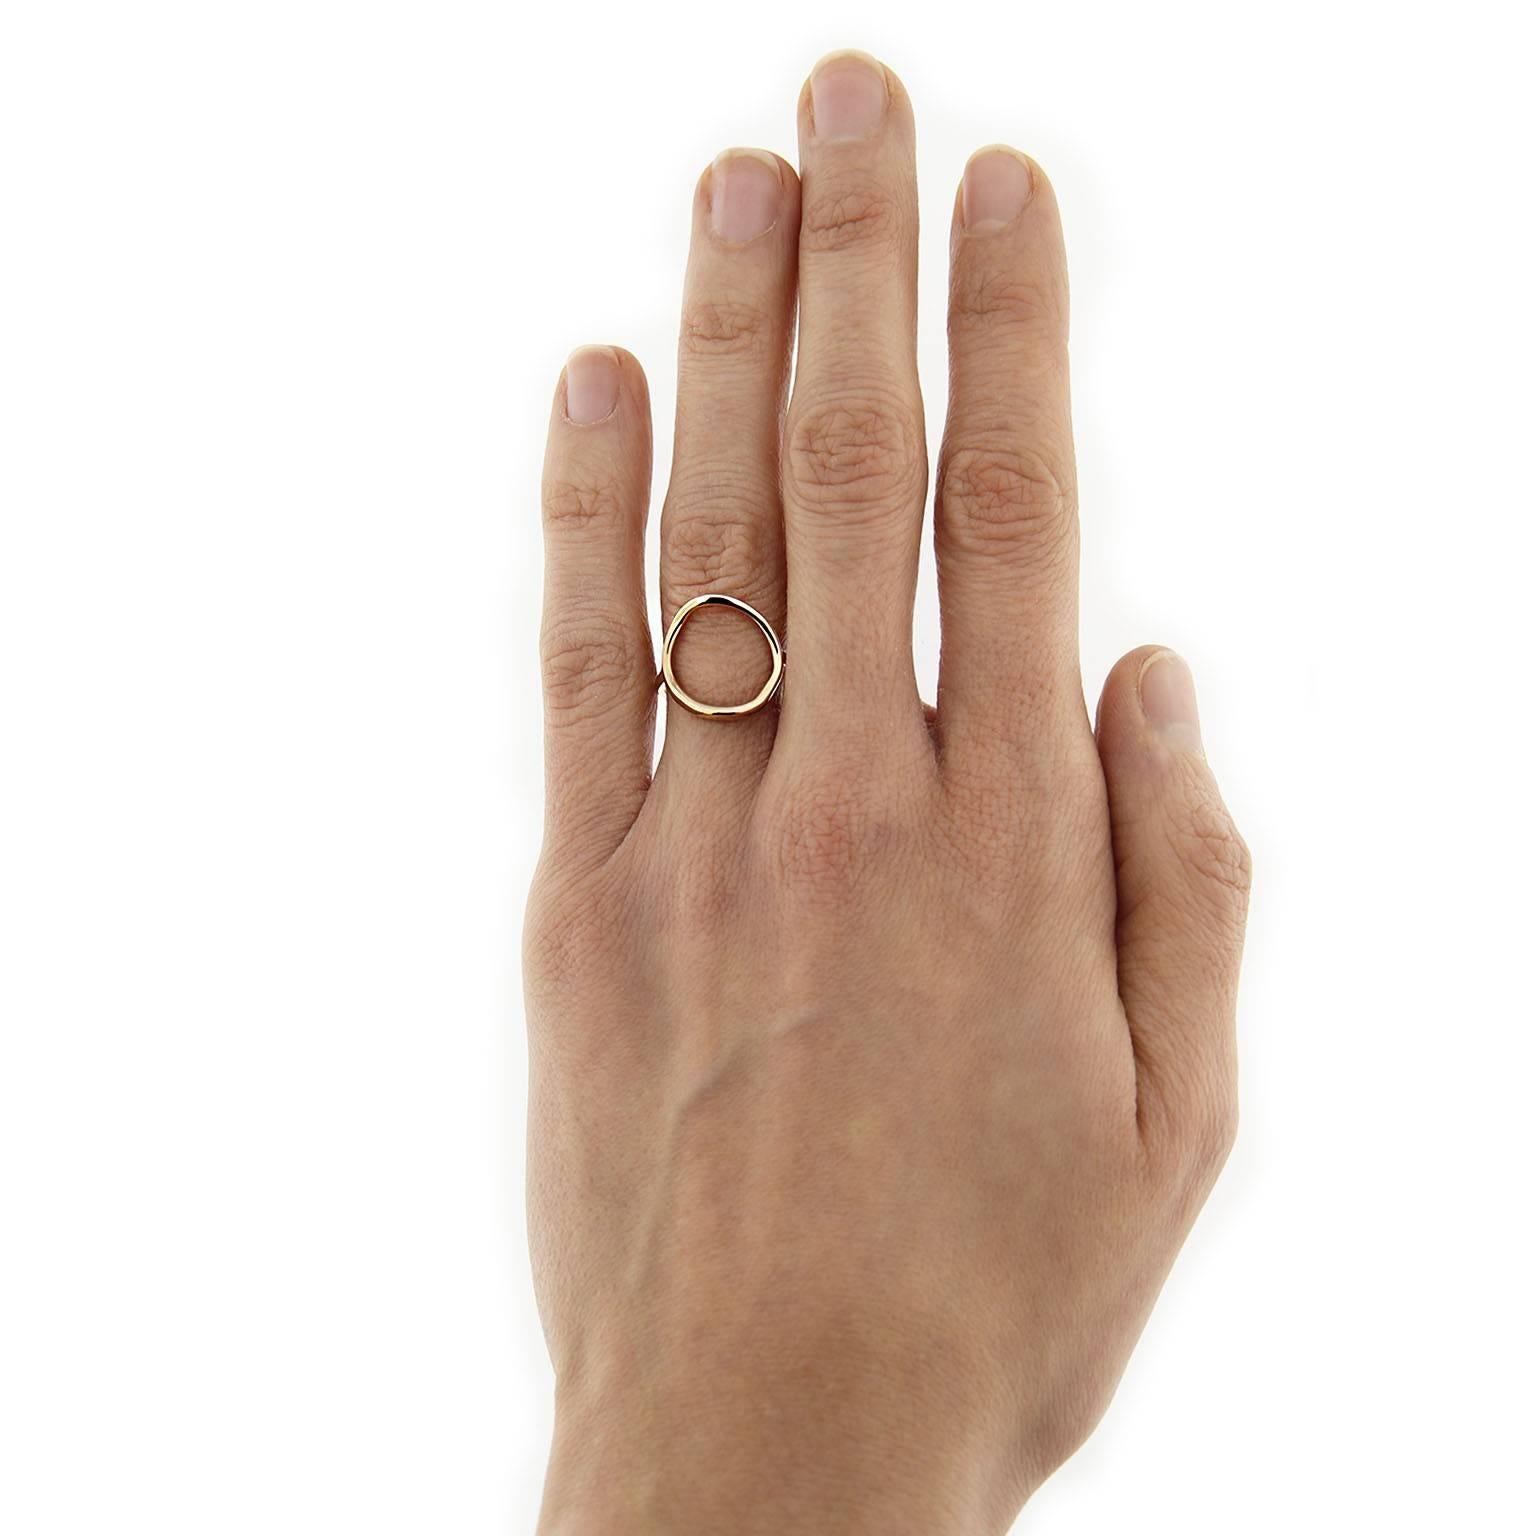 Jona design collection, hand crafted in Italy, open circle hoop ring in 18 karat rose gold. Ring size 6, can be sized.
All Jona jewelry is new and has never been previously owned or worn. Each item will arrive at your door beautifully gift wrapped